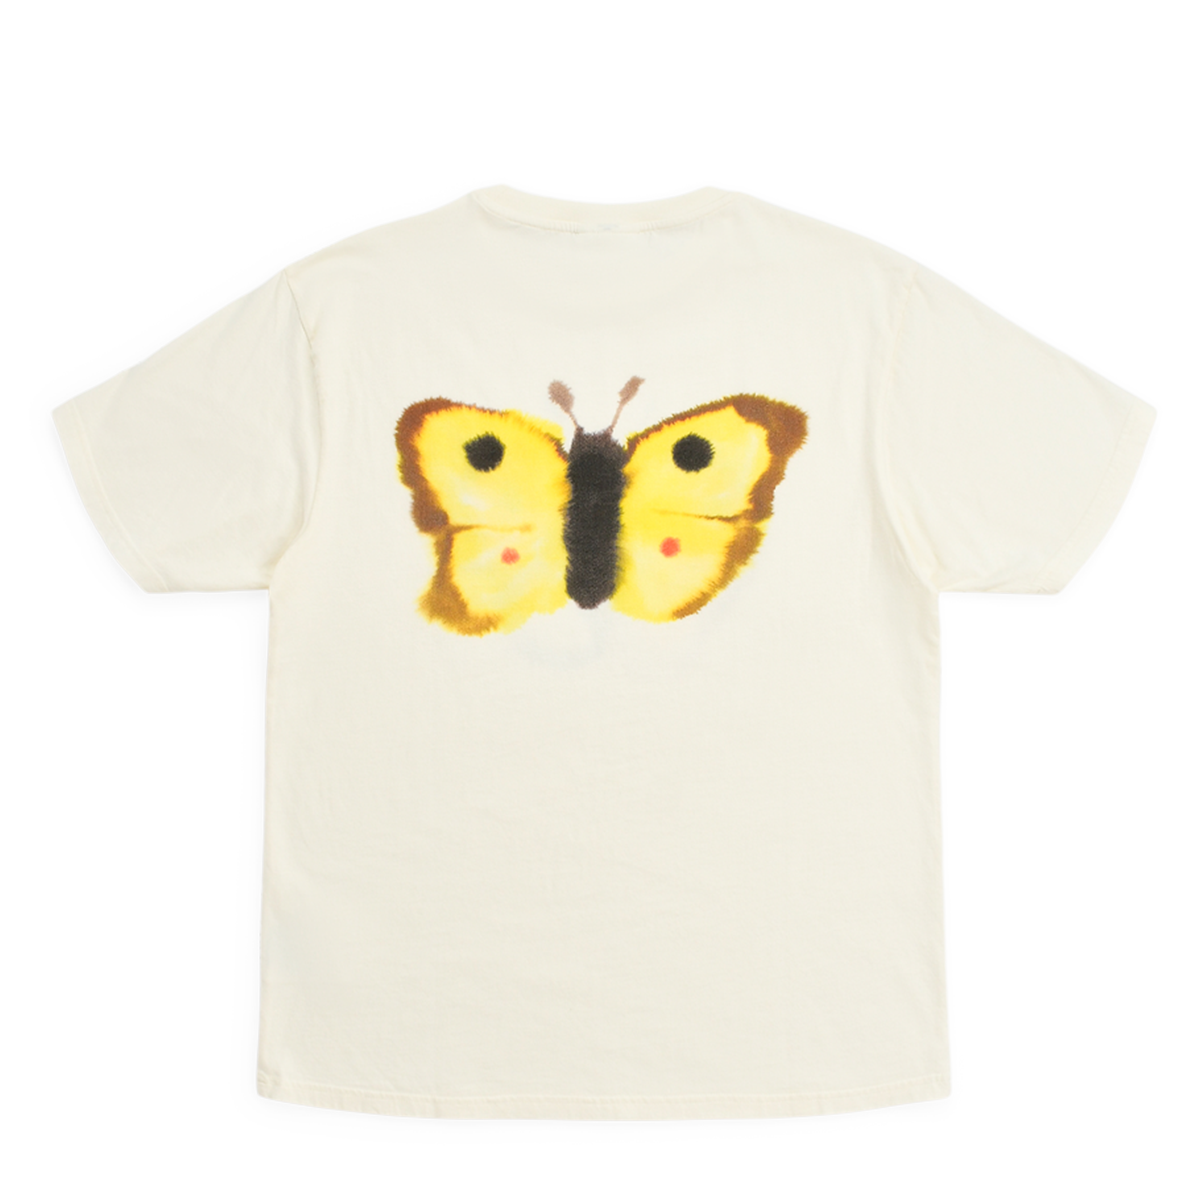 WILD ANIMALS - TEE - BUTTERFLY BUTTERFLY